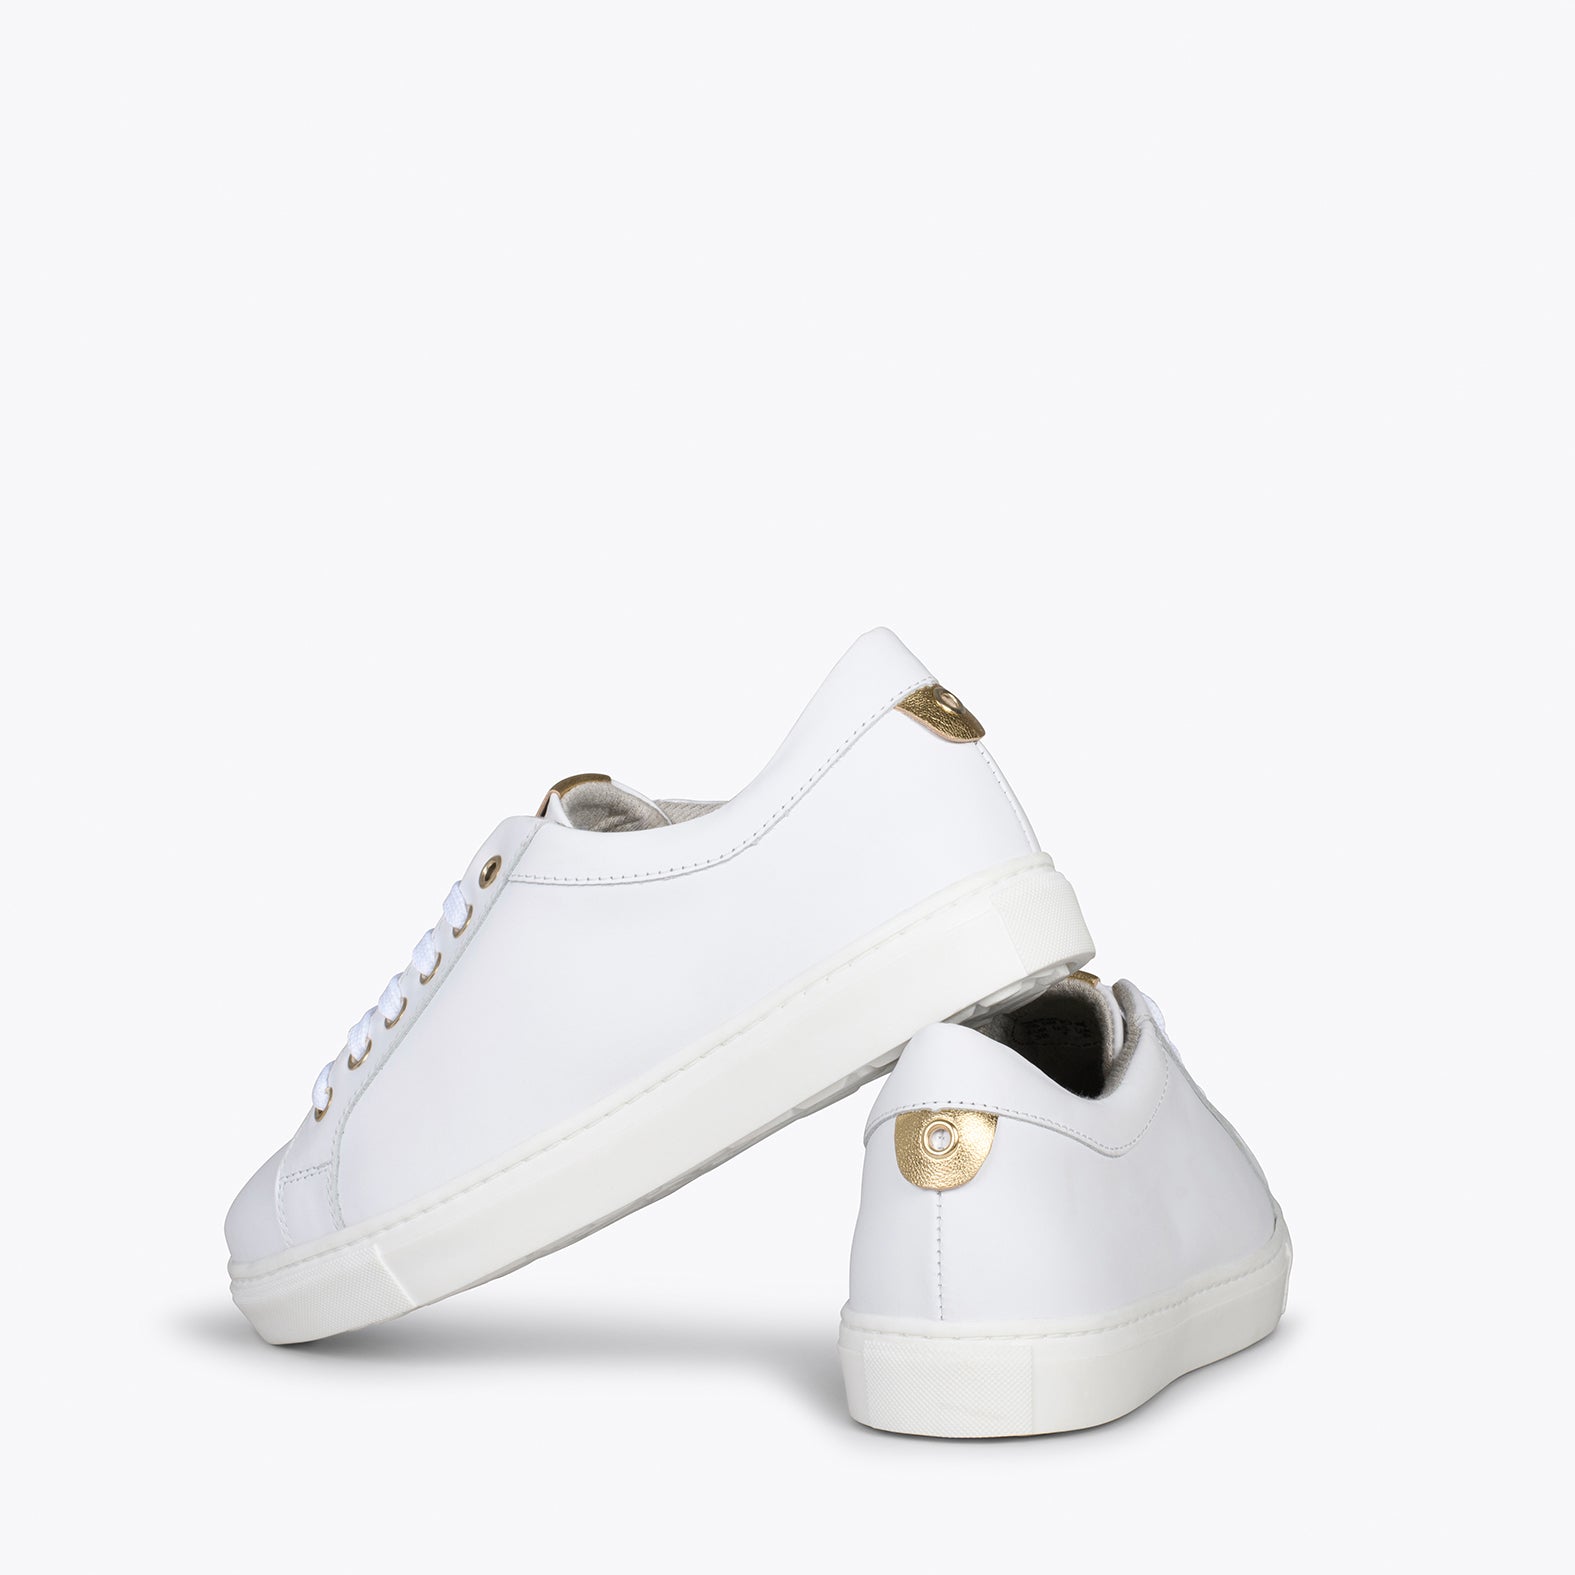 SNEAKER – WHITE & GOLD casual sneakers for women